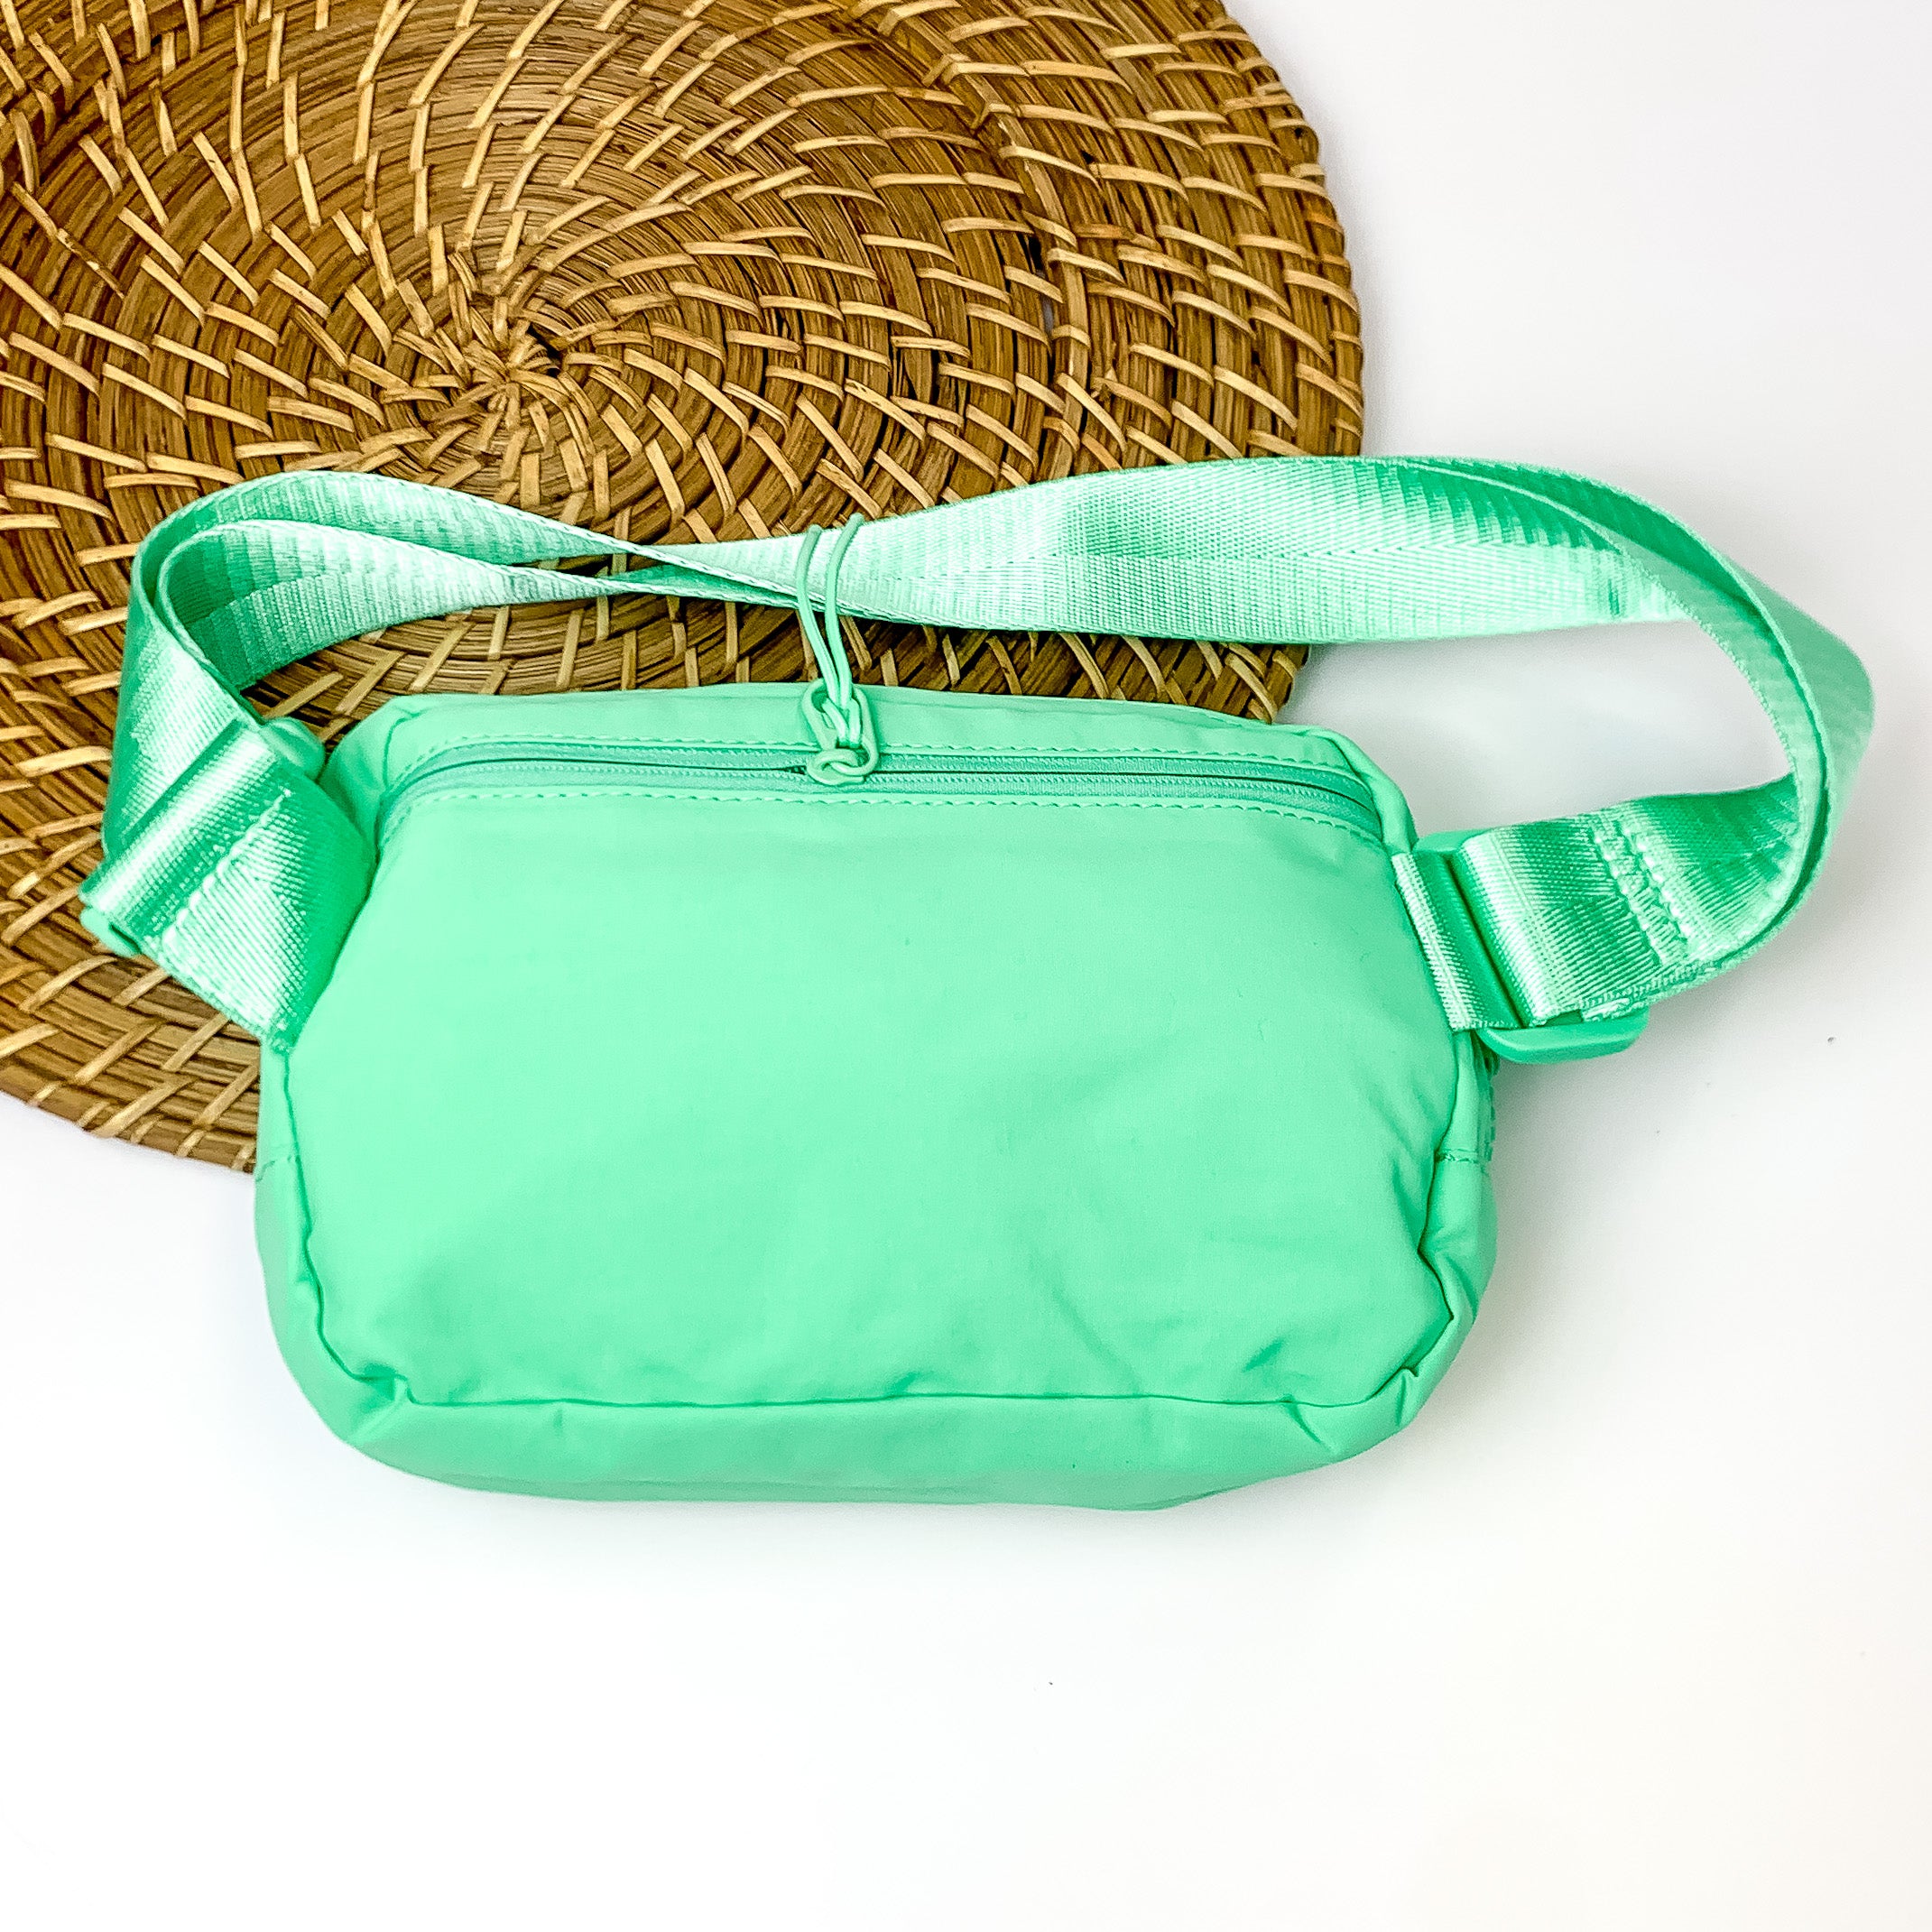 Love the Journey Fanny Pack in Turquoise - Giddy Up Glamour Boutique